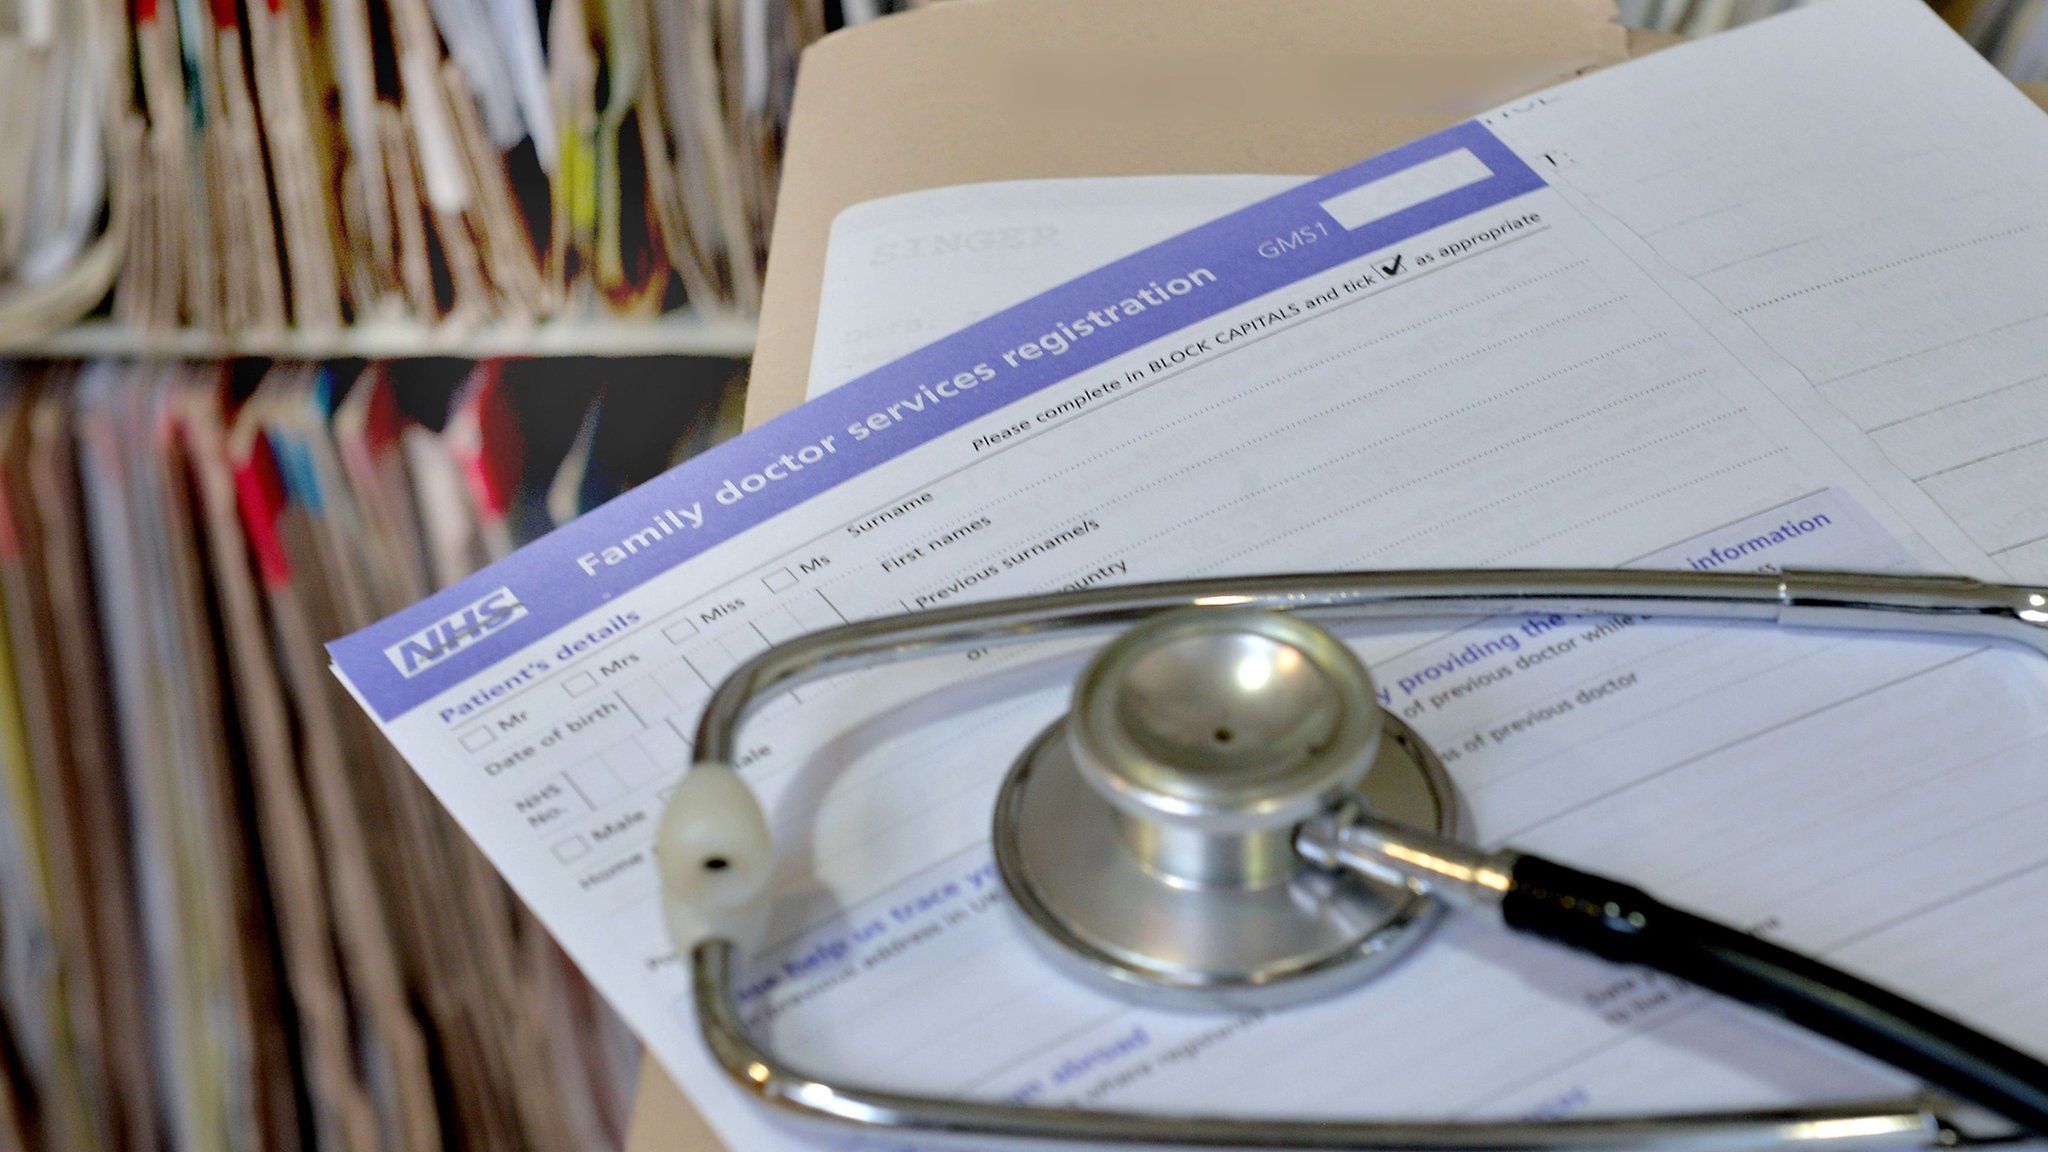 Registration form and a stethoscope at a GP practice